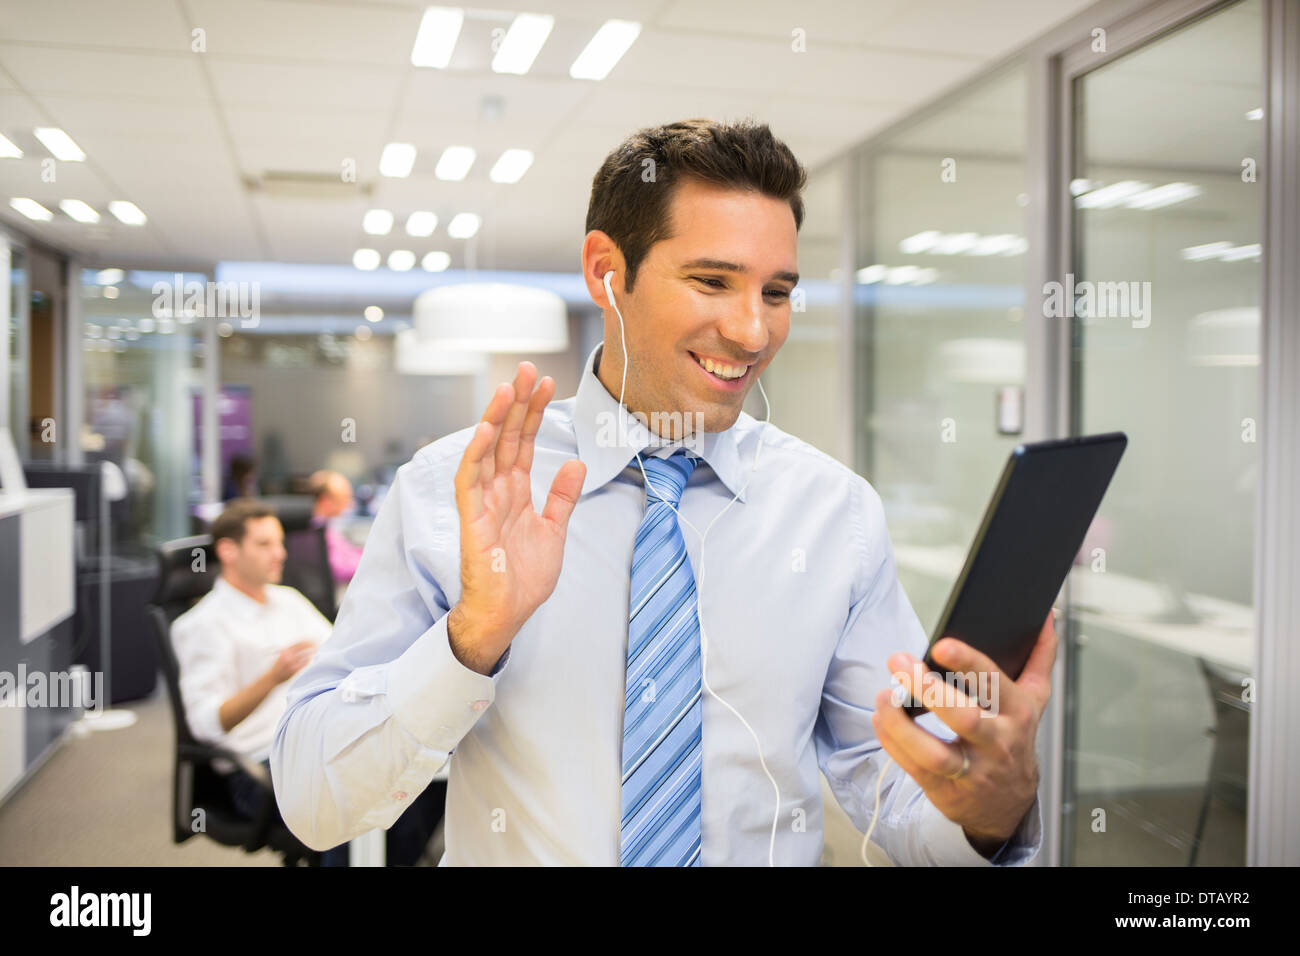 Smiling Businessman chatting on internet with Tablet Pc, office Background Stock Photo